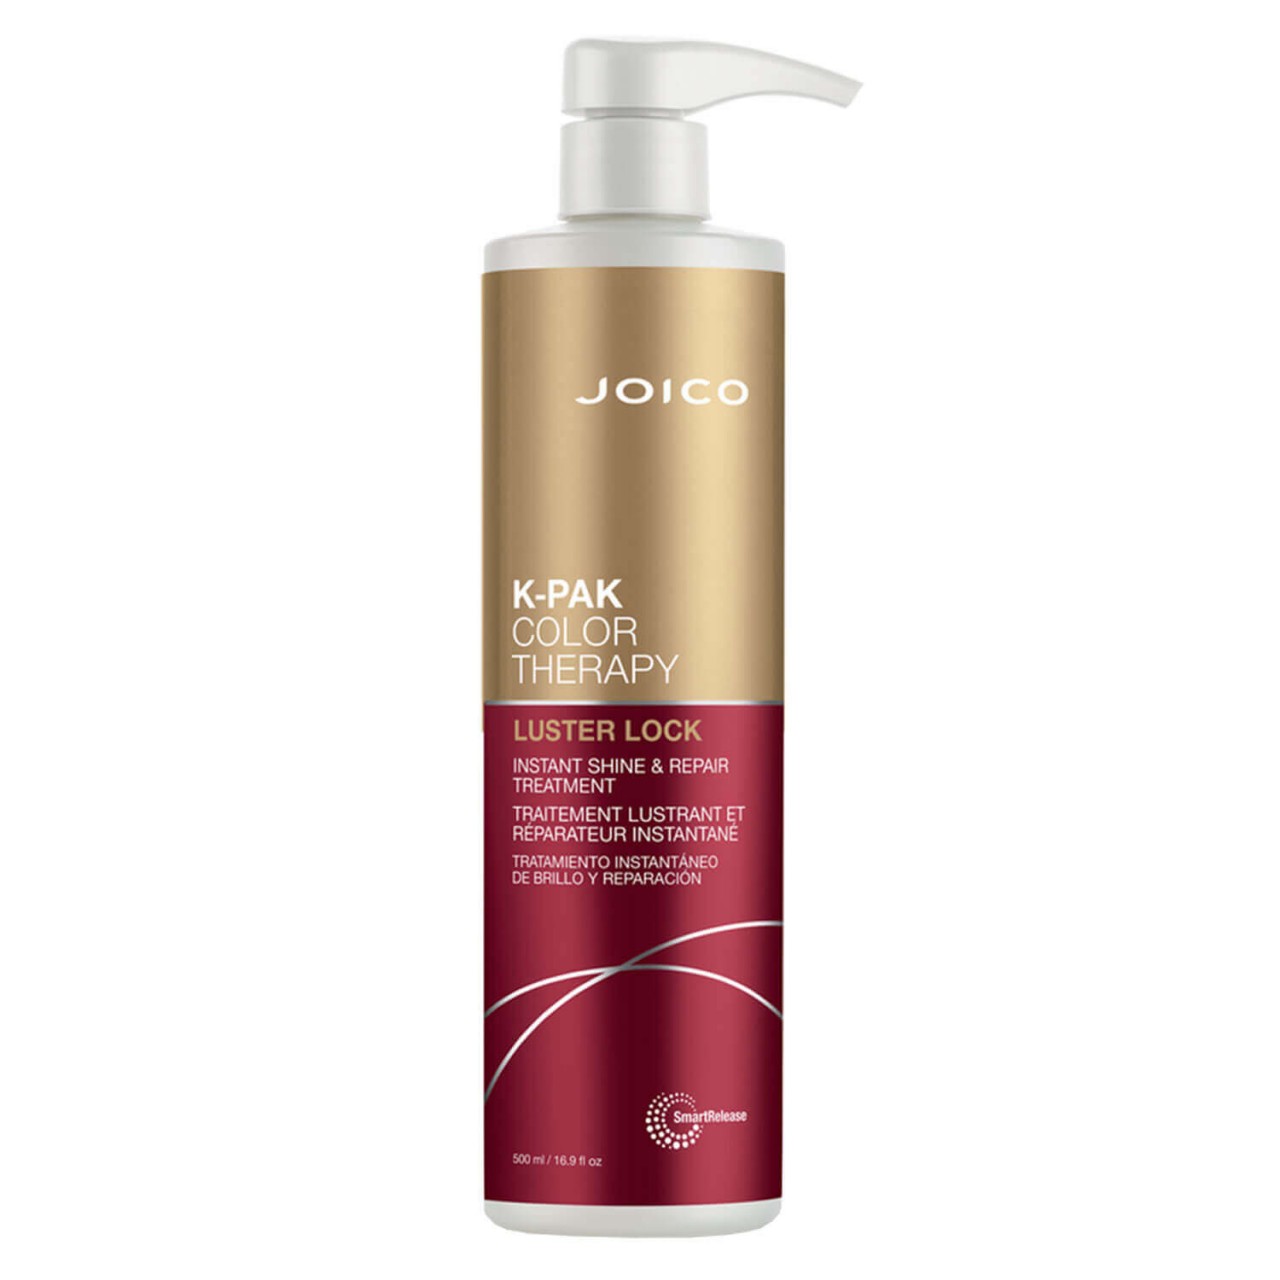 K-Pak - Color Therapy Luster Lock Instant Shine & Repair Treatment von Joico